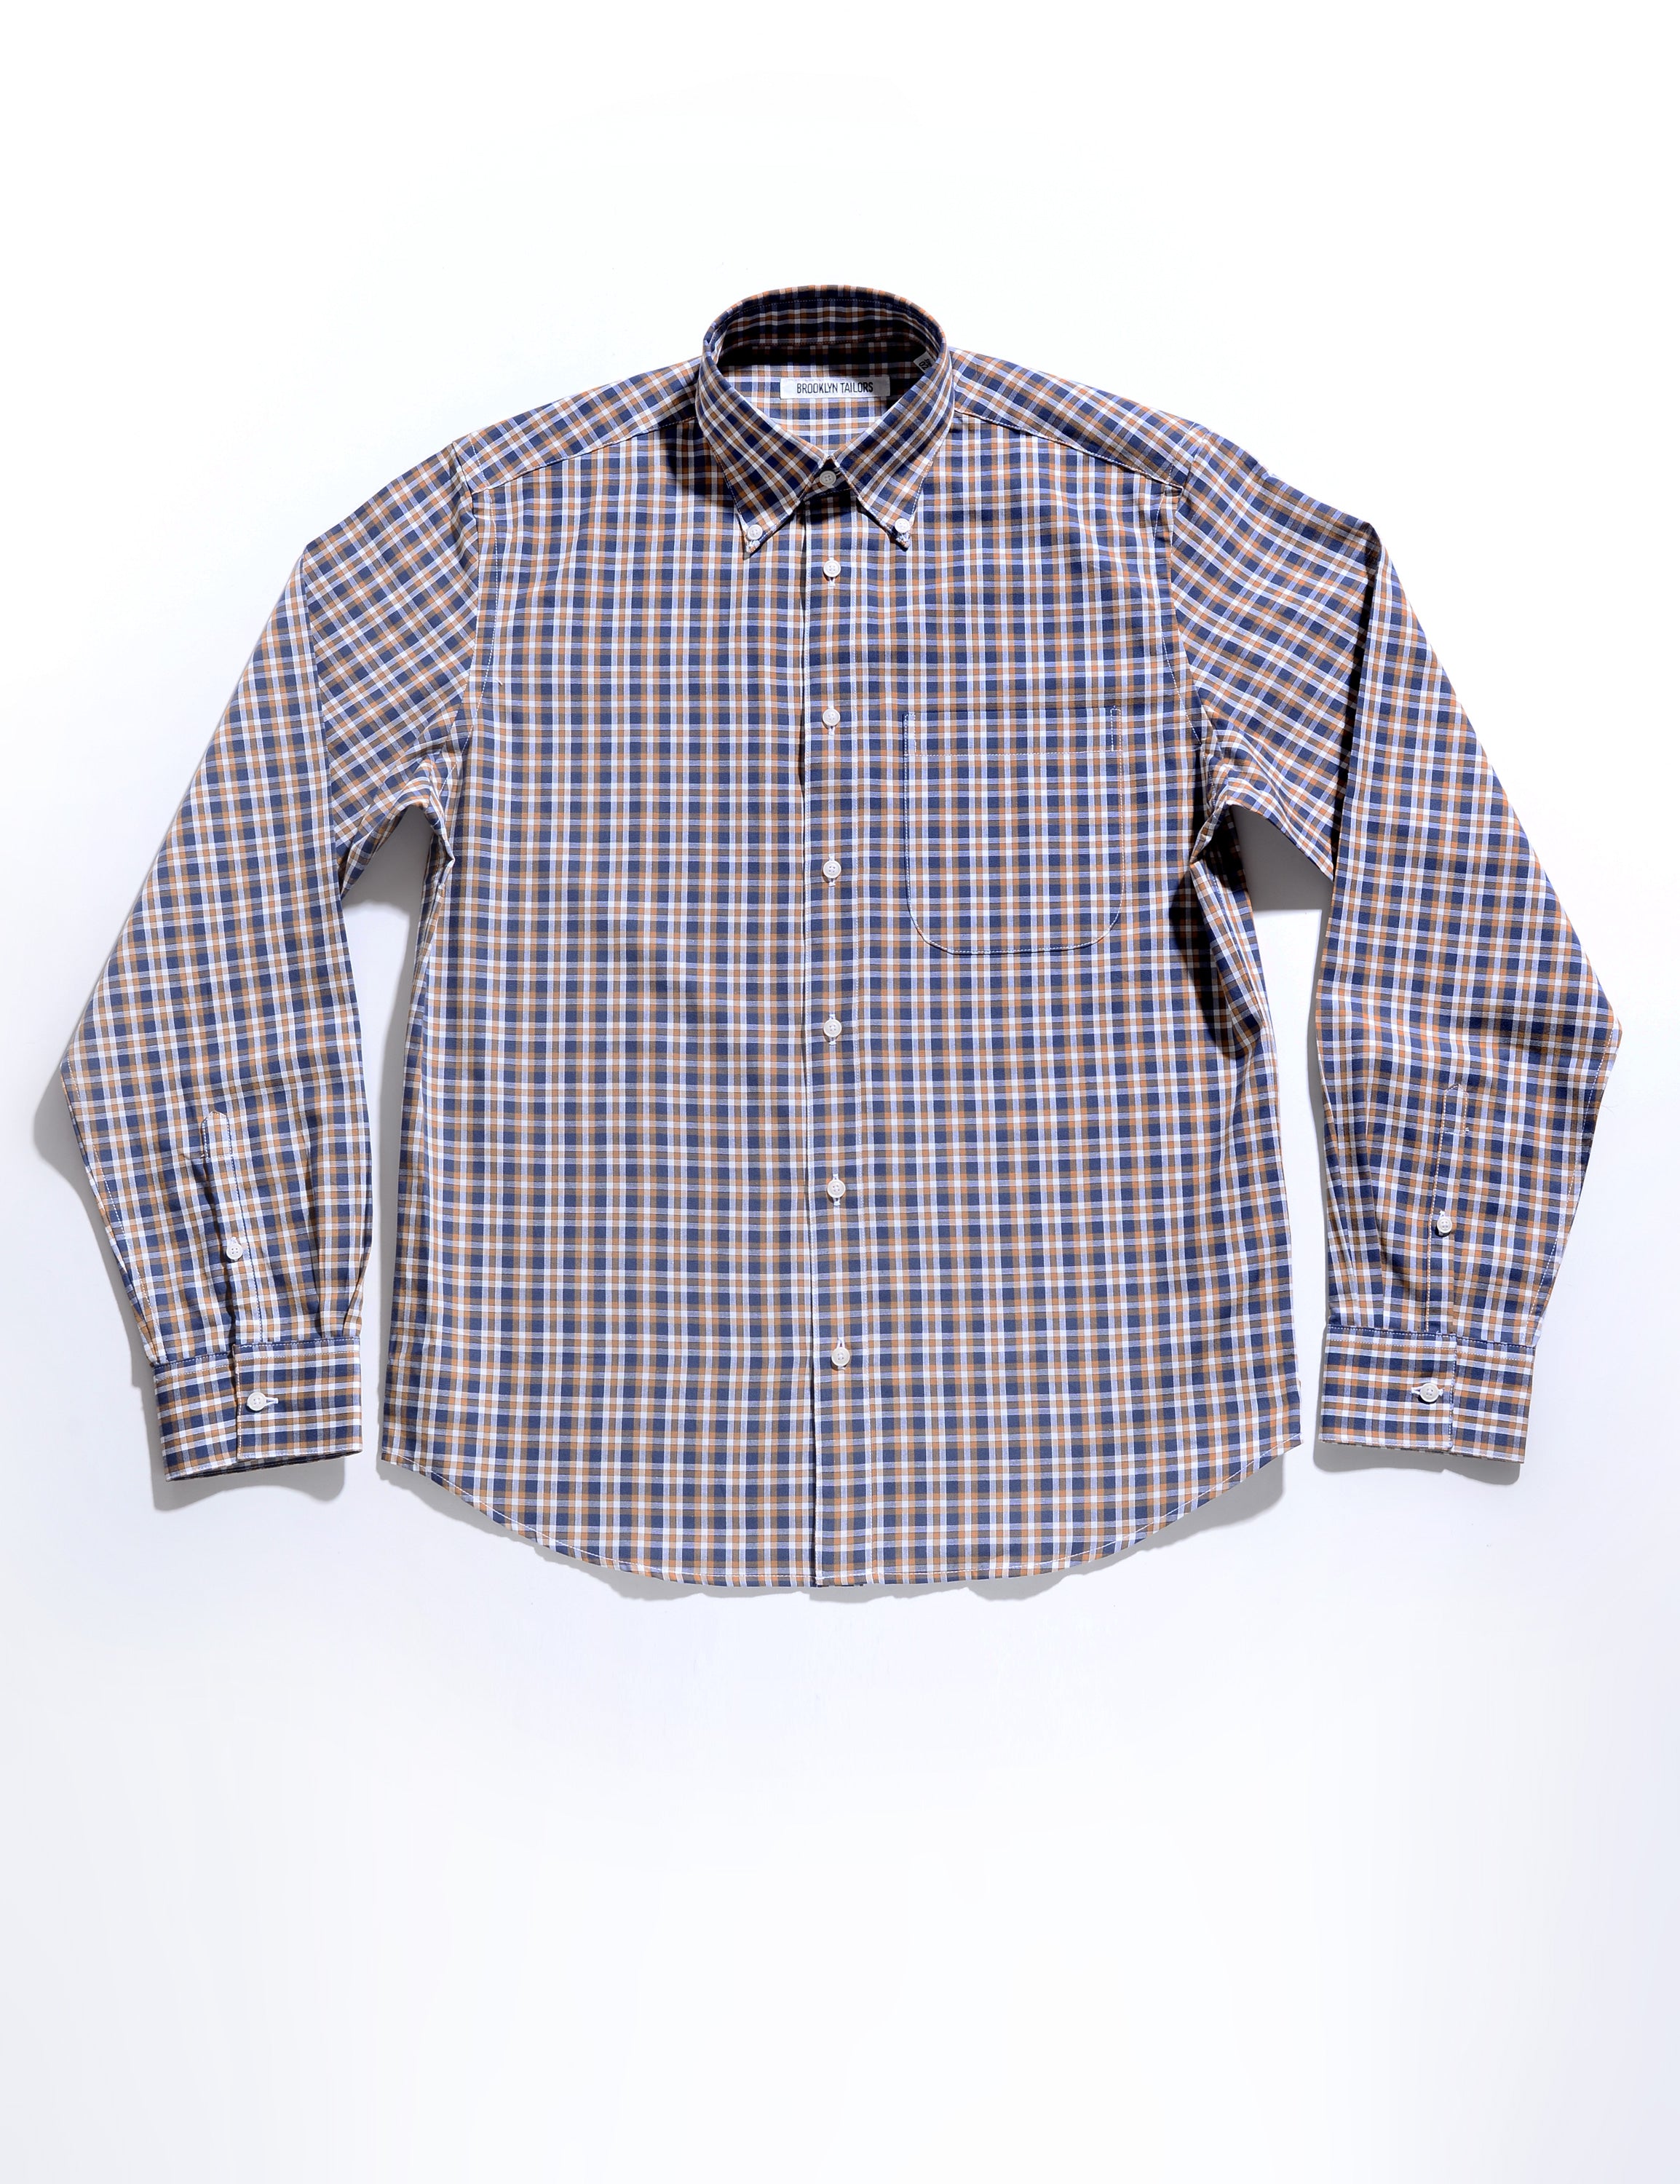 BKT14 Relaxed Shirt in Cotton Poplin - '70s Plaid – Brooklyn Tailors